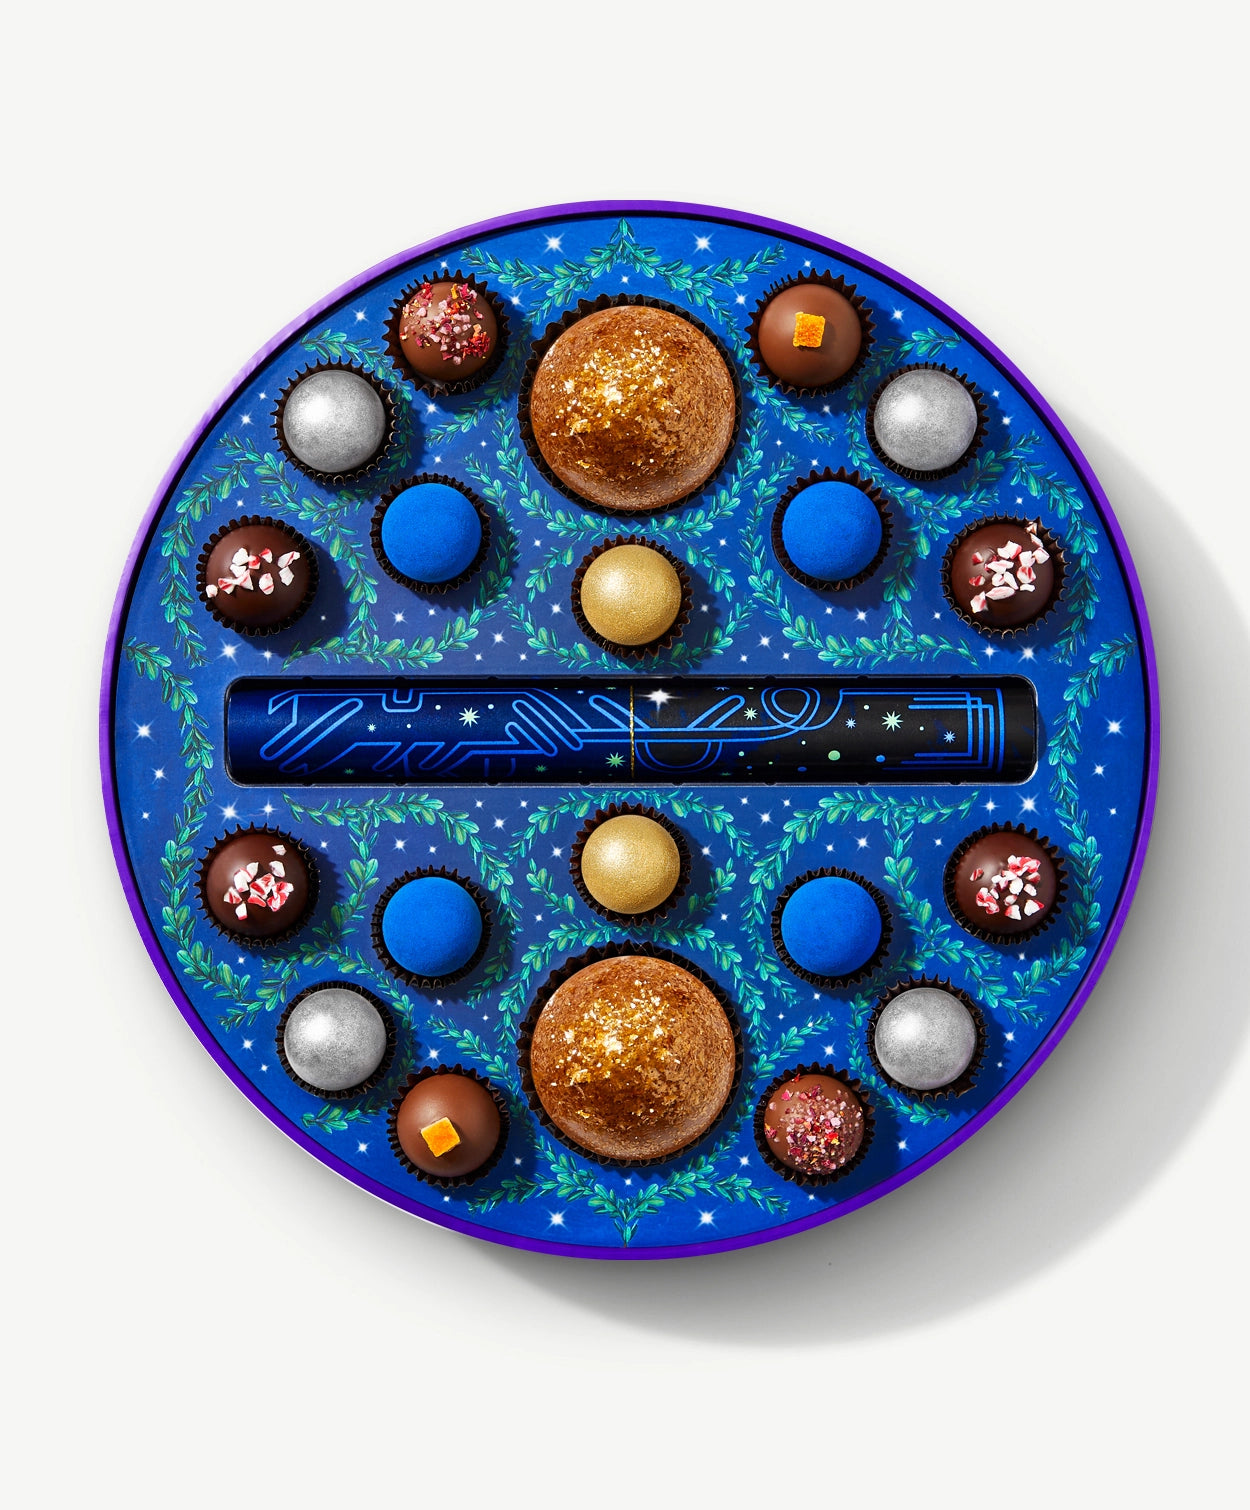 A round Vosges chocolate box sits open, revealing twenty brightly colored chocolate truffles adorned in blue algae and crushed peppermints, on a light grey background.